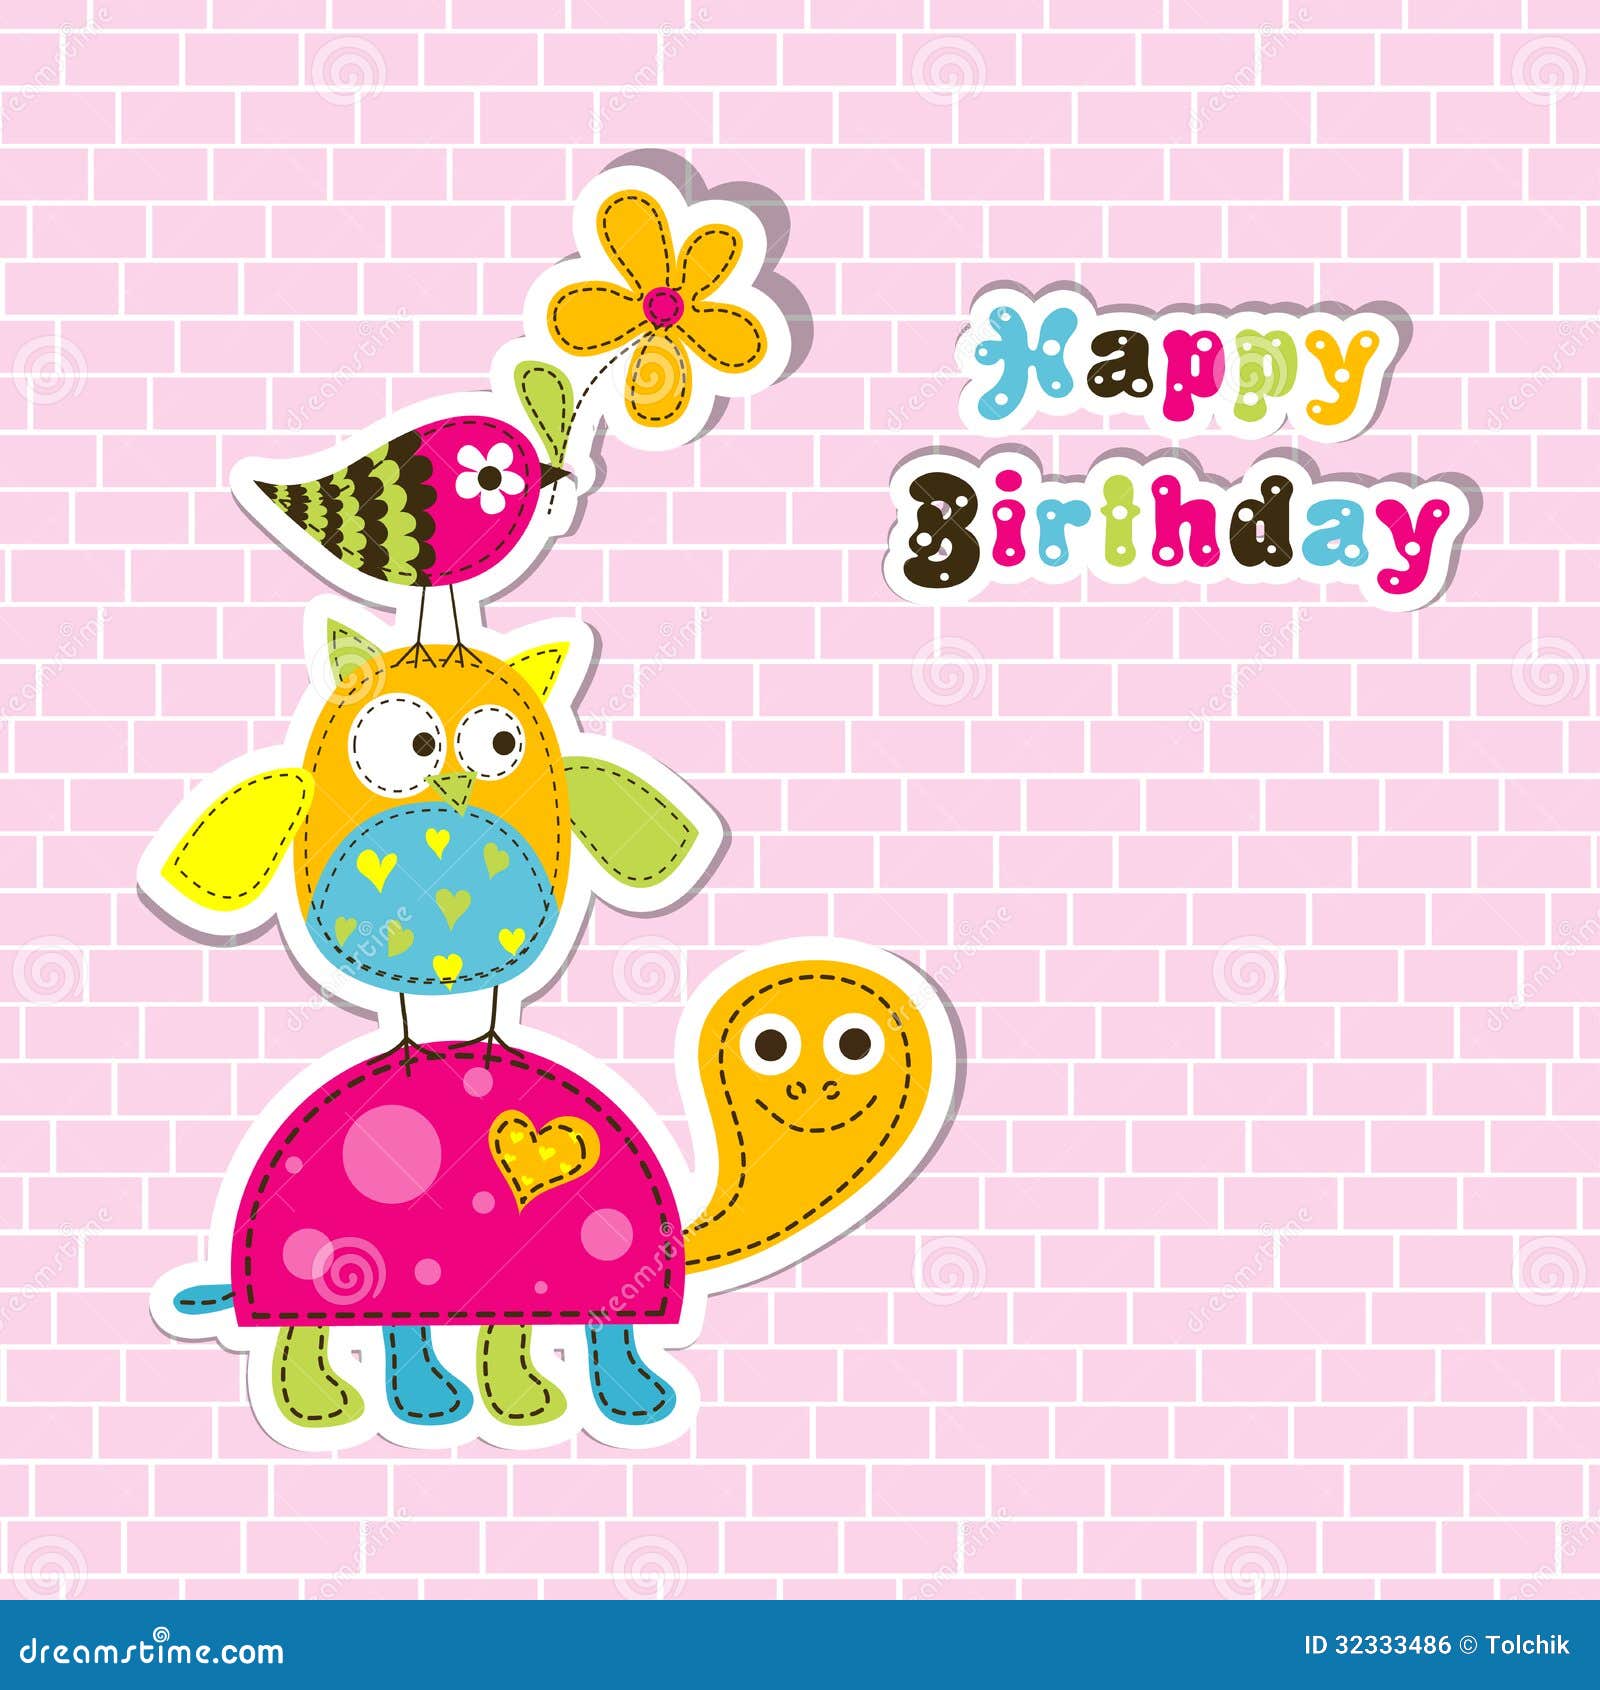 vector free download birthday card - photo #33